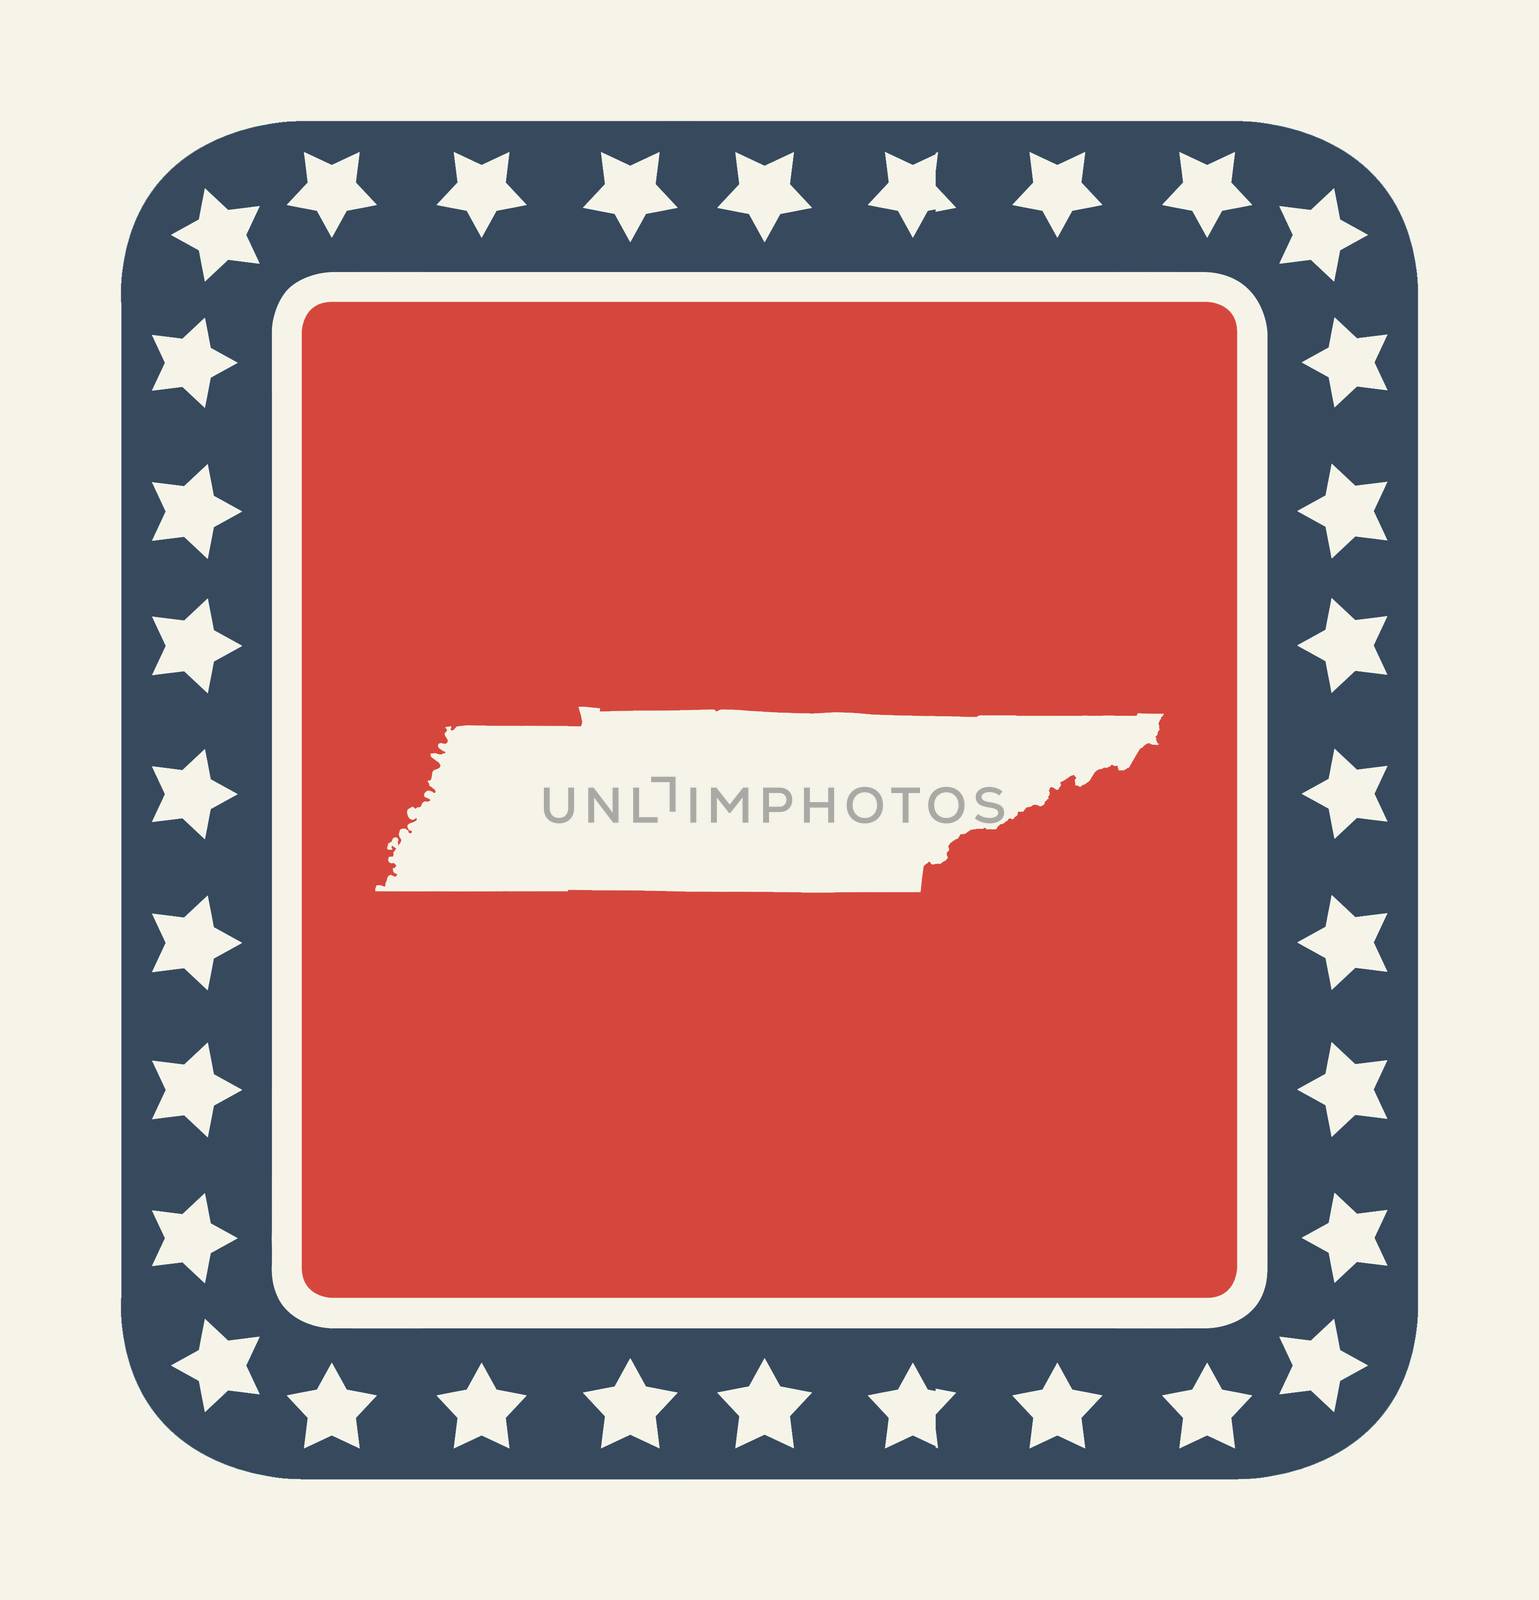 Tennessee state button on American flag in flat web design style, isolated on white background.